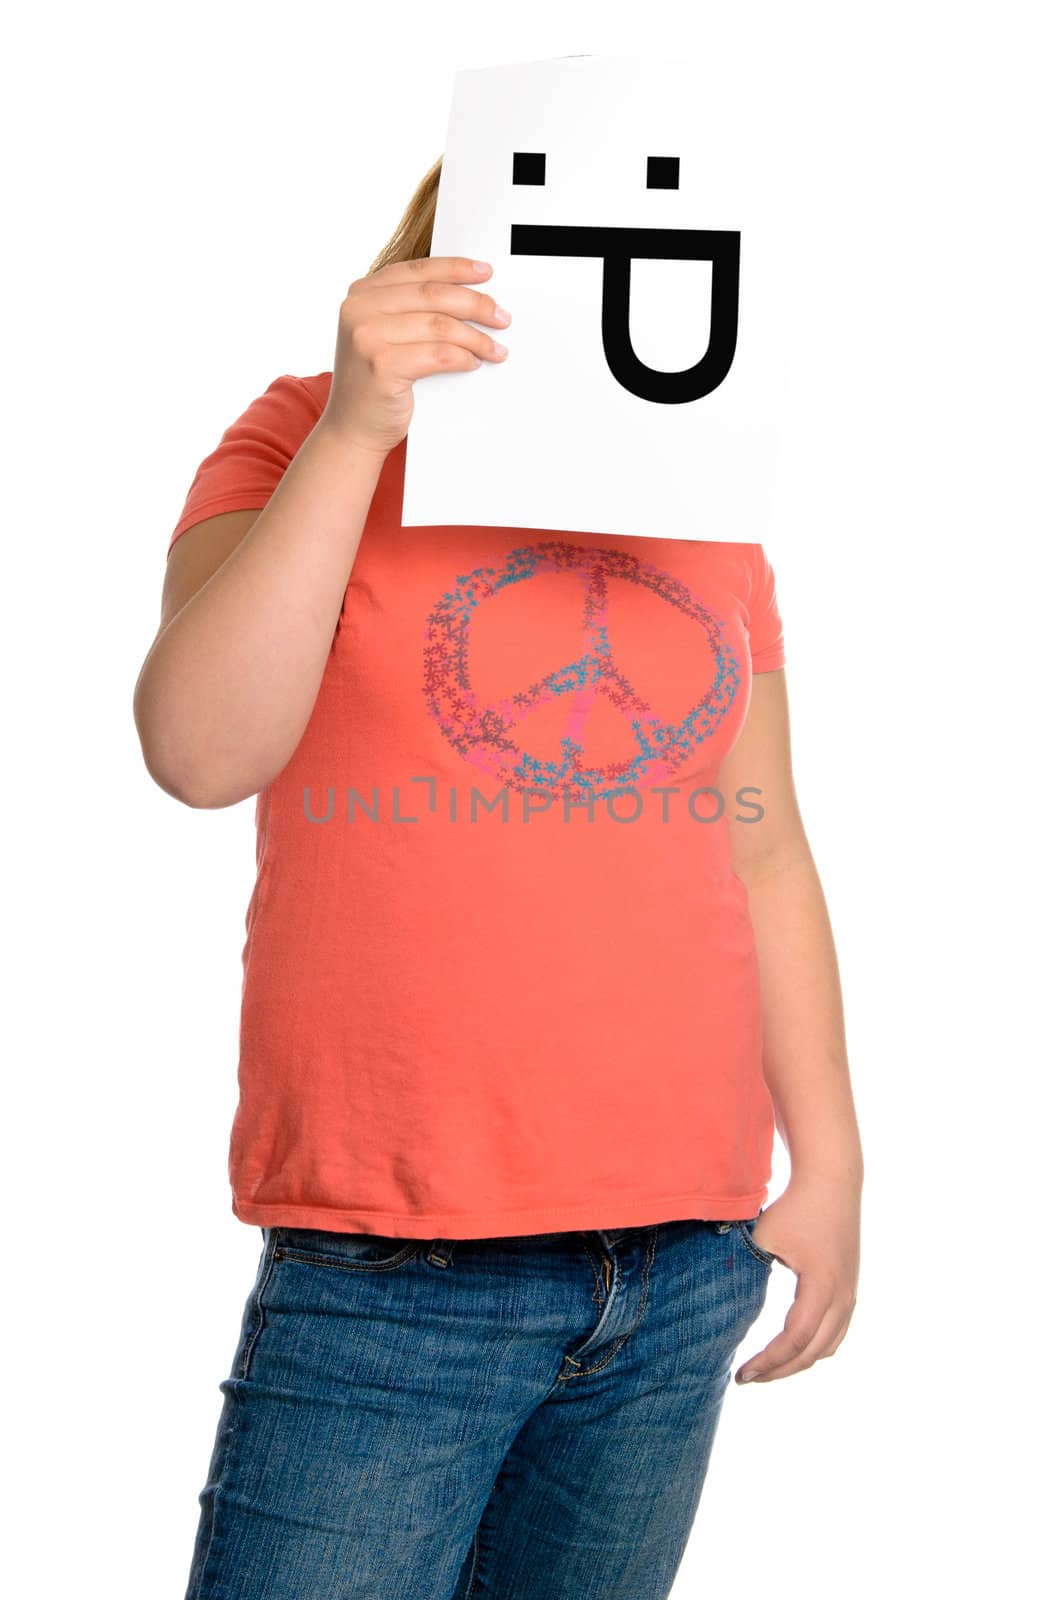 A young girl holding up an emoticon face with two eyes and a tongue sticking out, isolated against a white background.